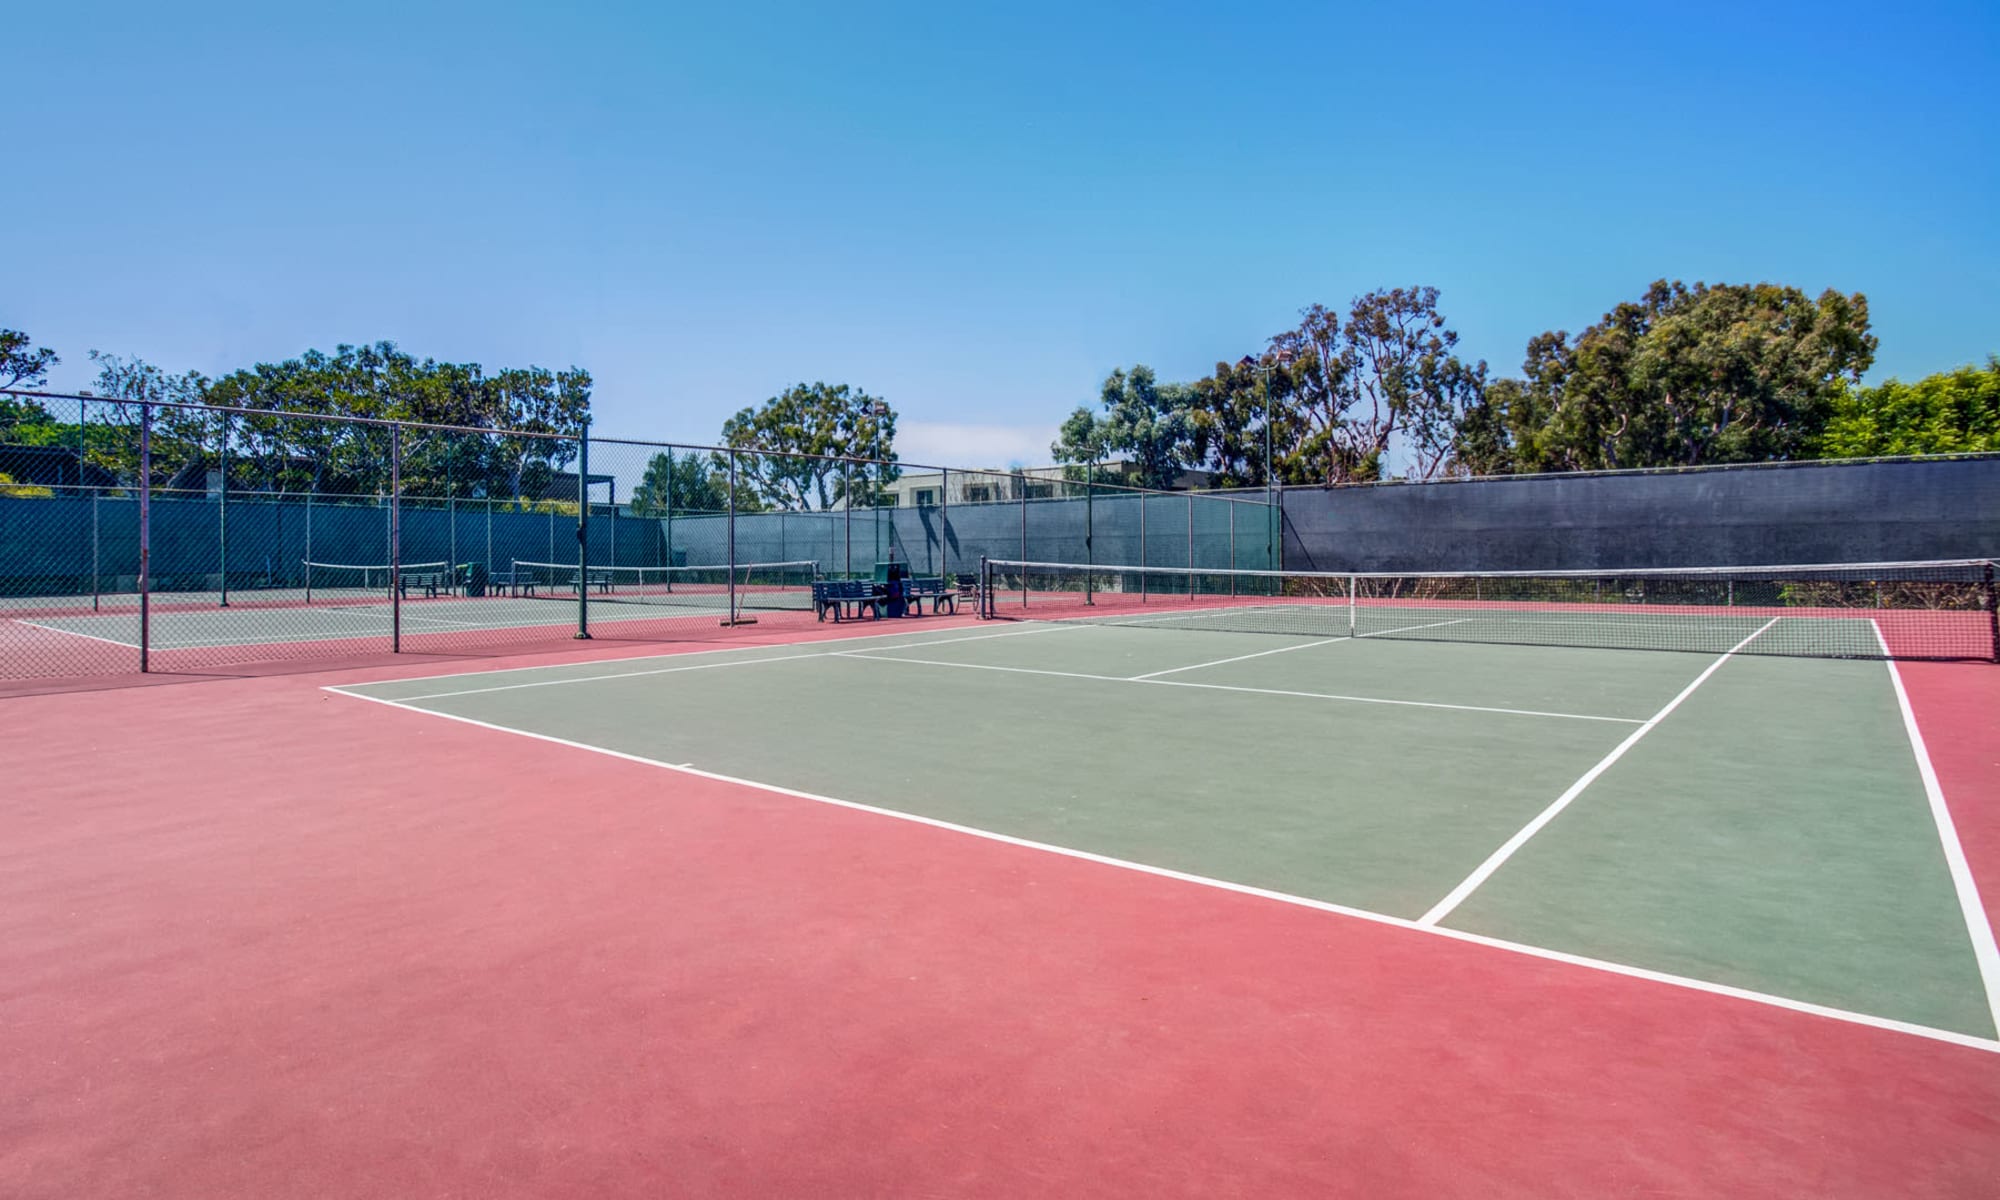 Tennis courts at Mariners Village in Marina del Rey, California